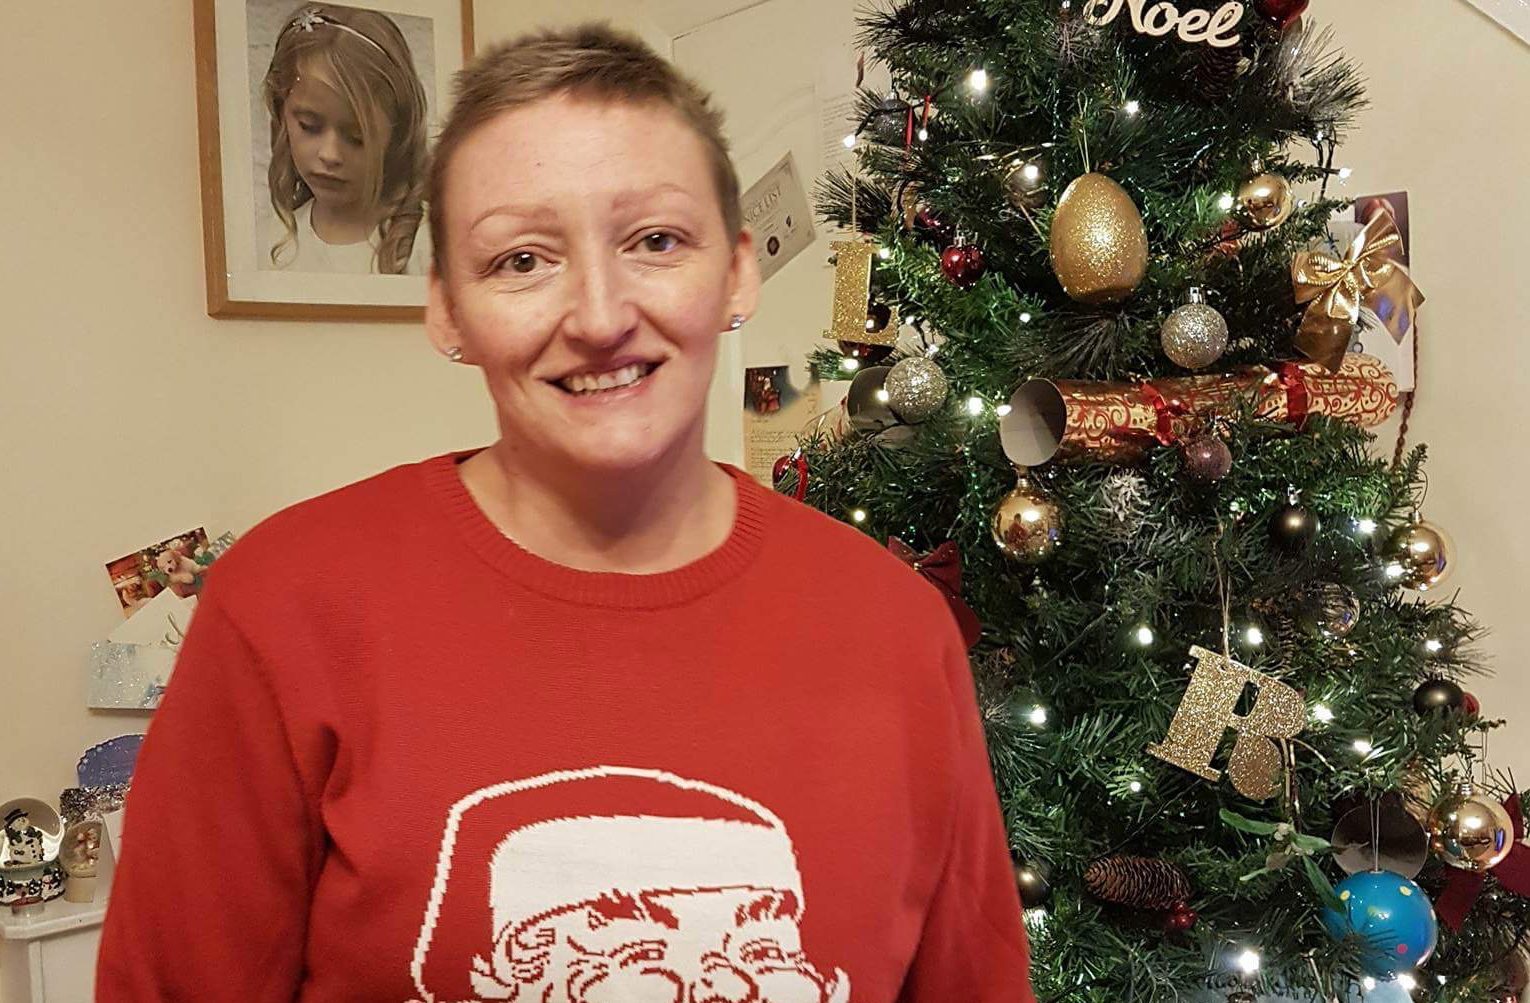 Lesley Graham, who has been taking Kadcyla for her cancer and is celebrating a Christmas she didn't think she would see (Supplied)